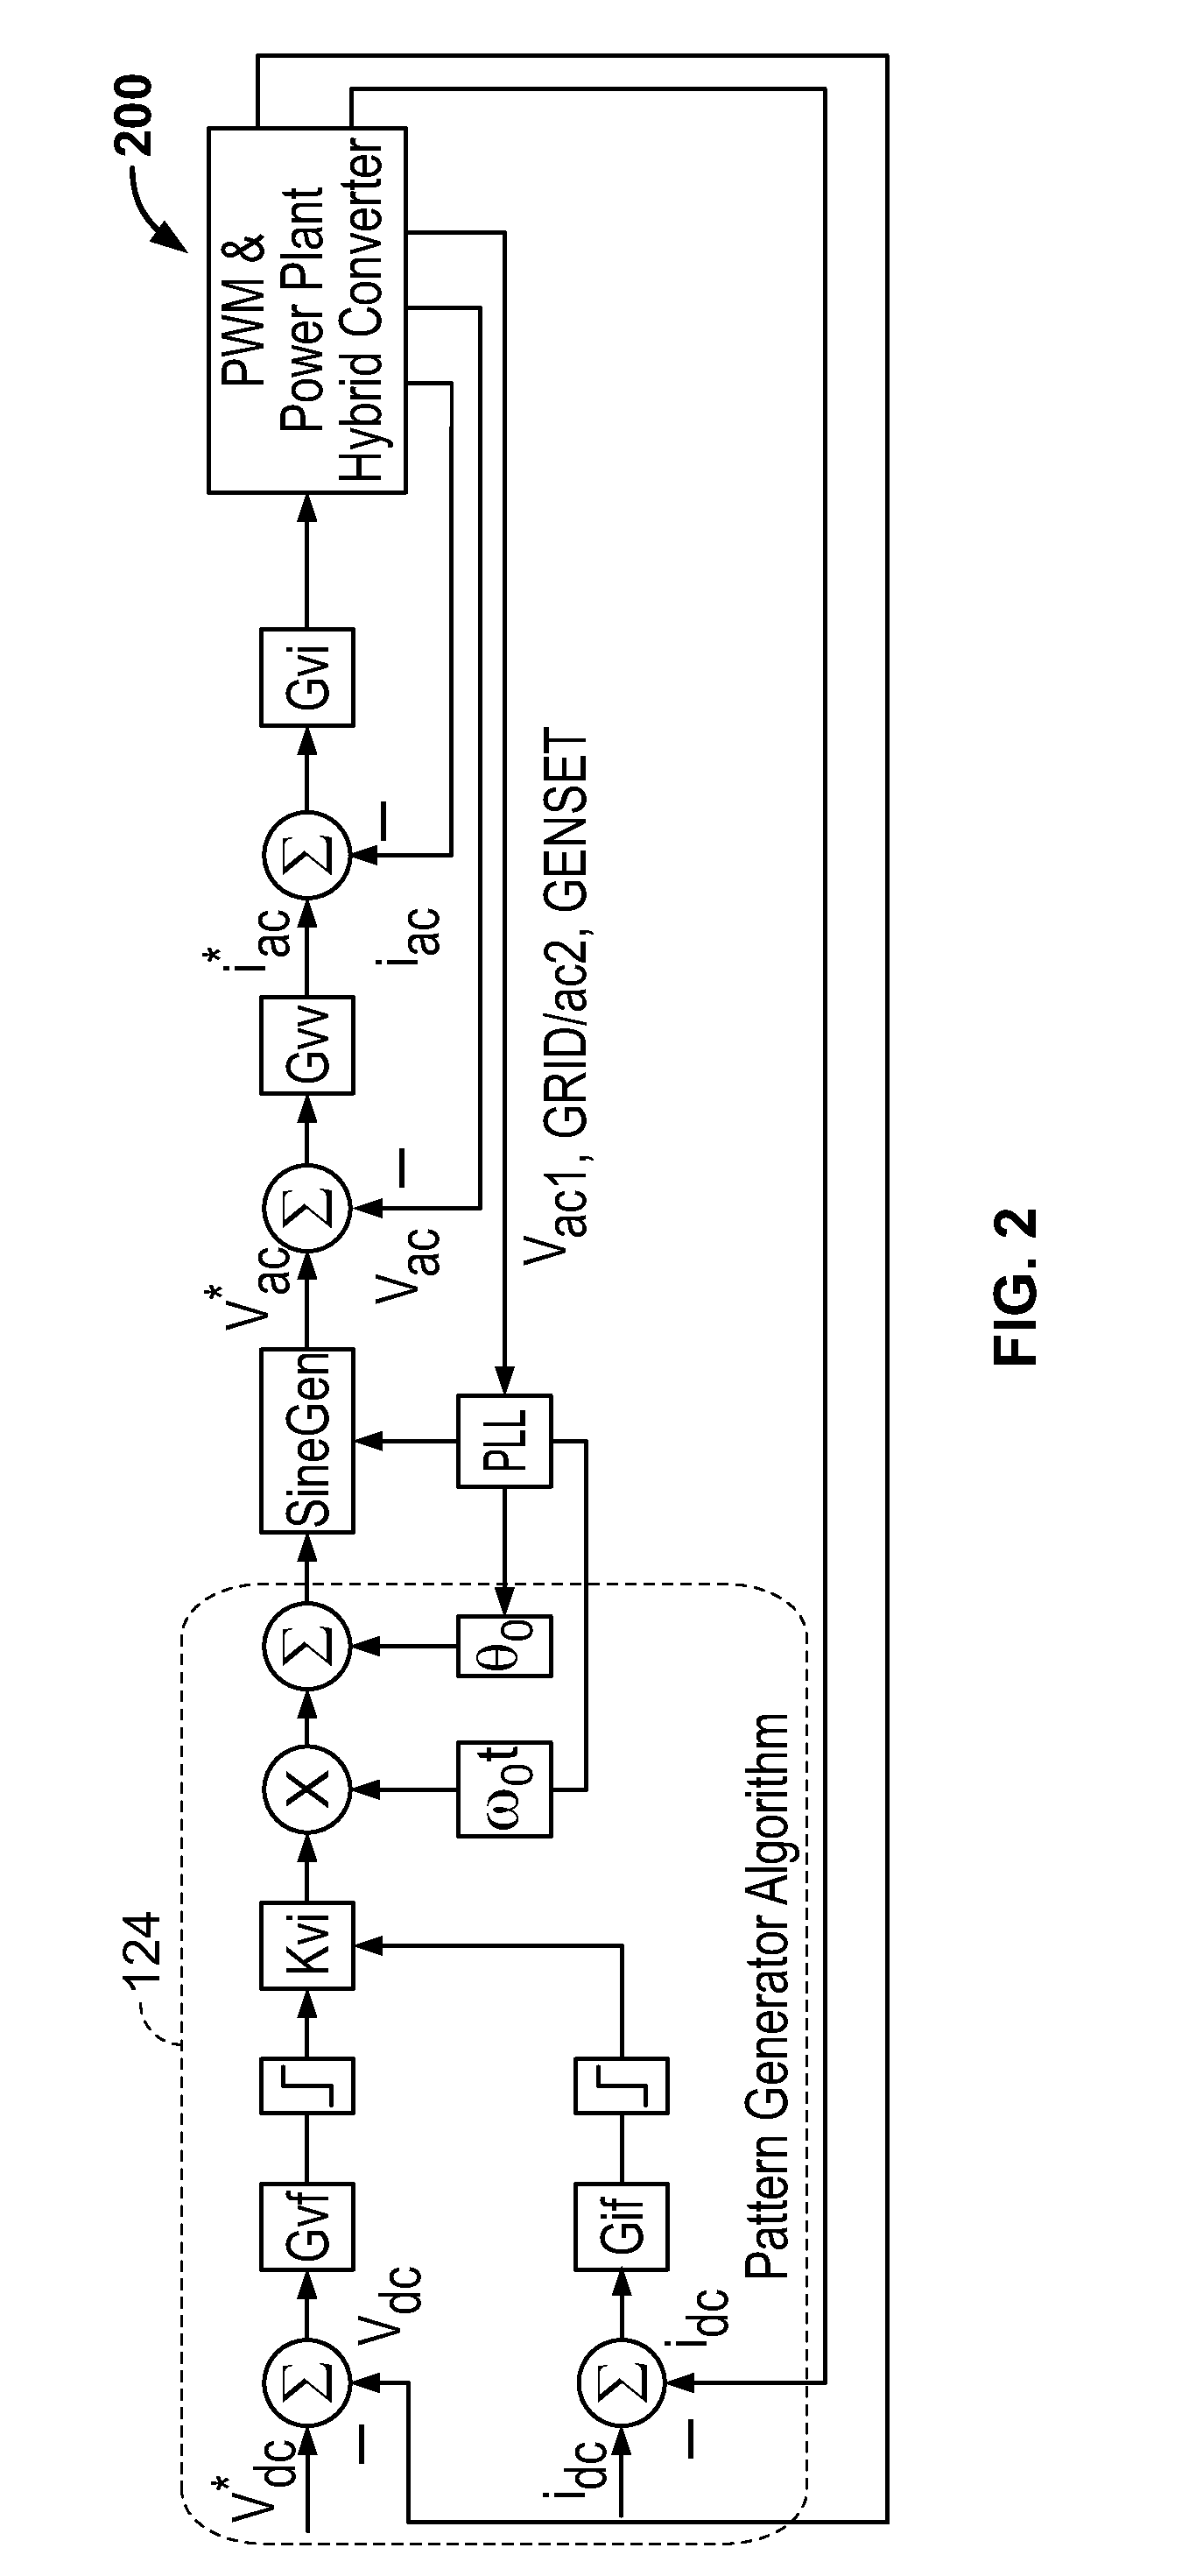 Ac connected modules with line frequency or voltage variation pattern for energy control